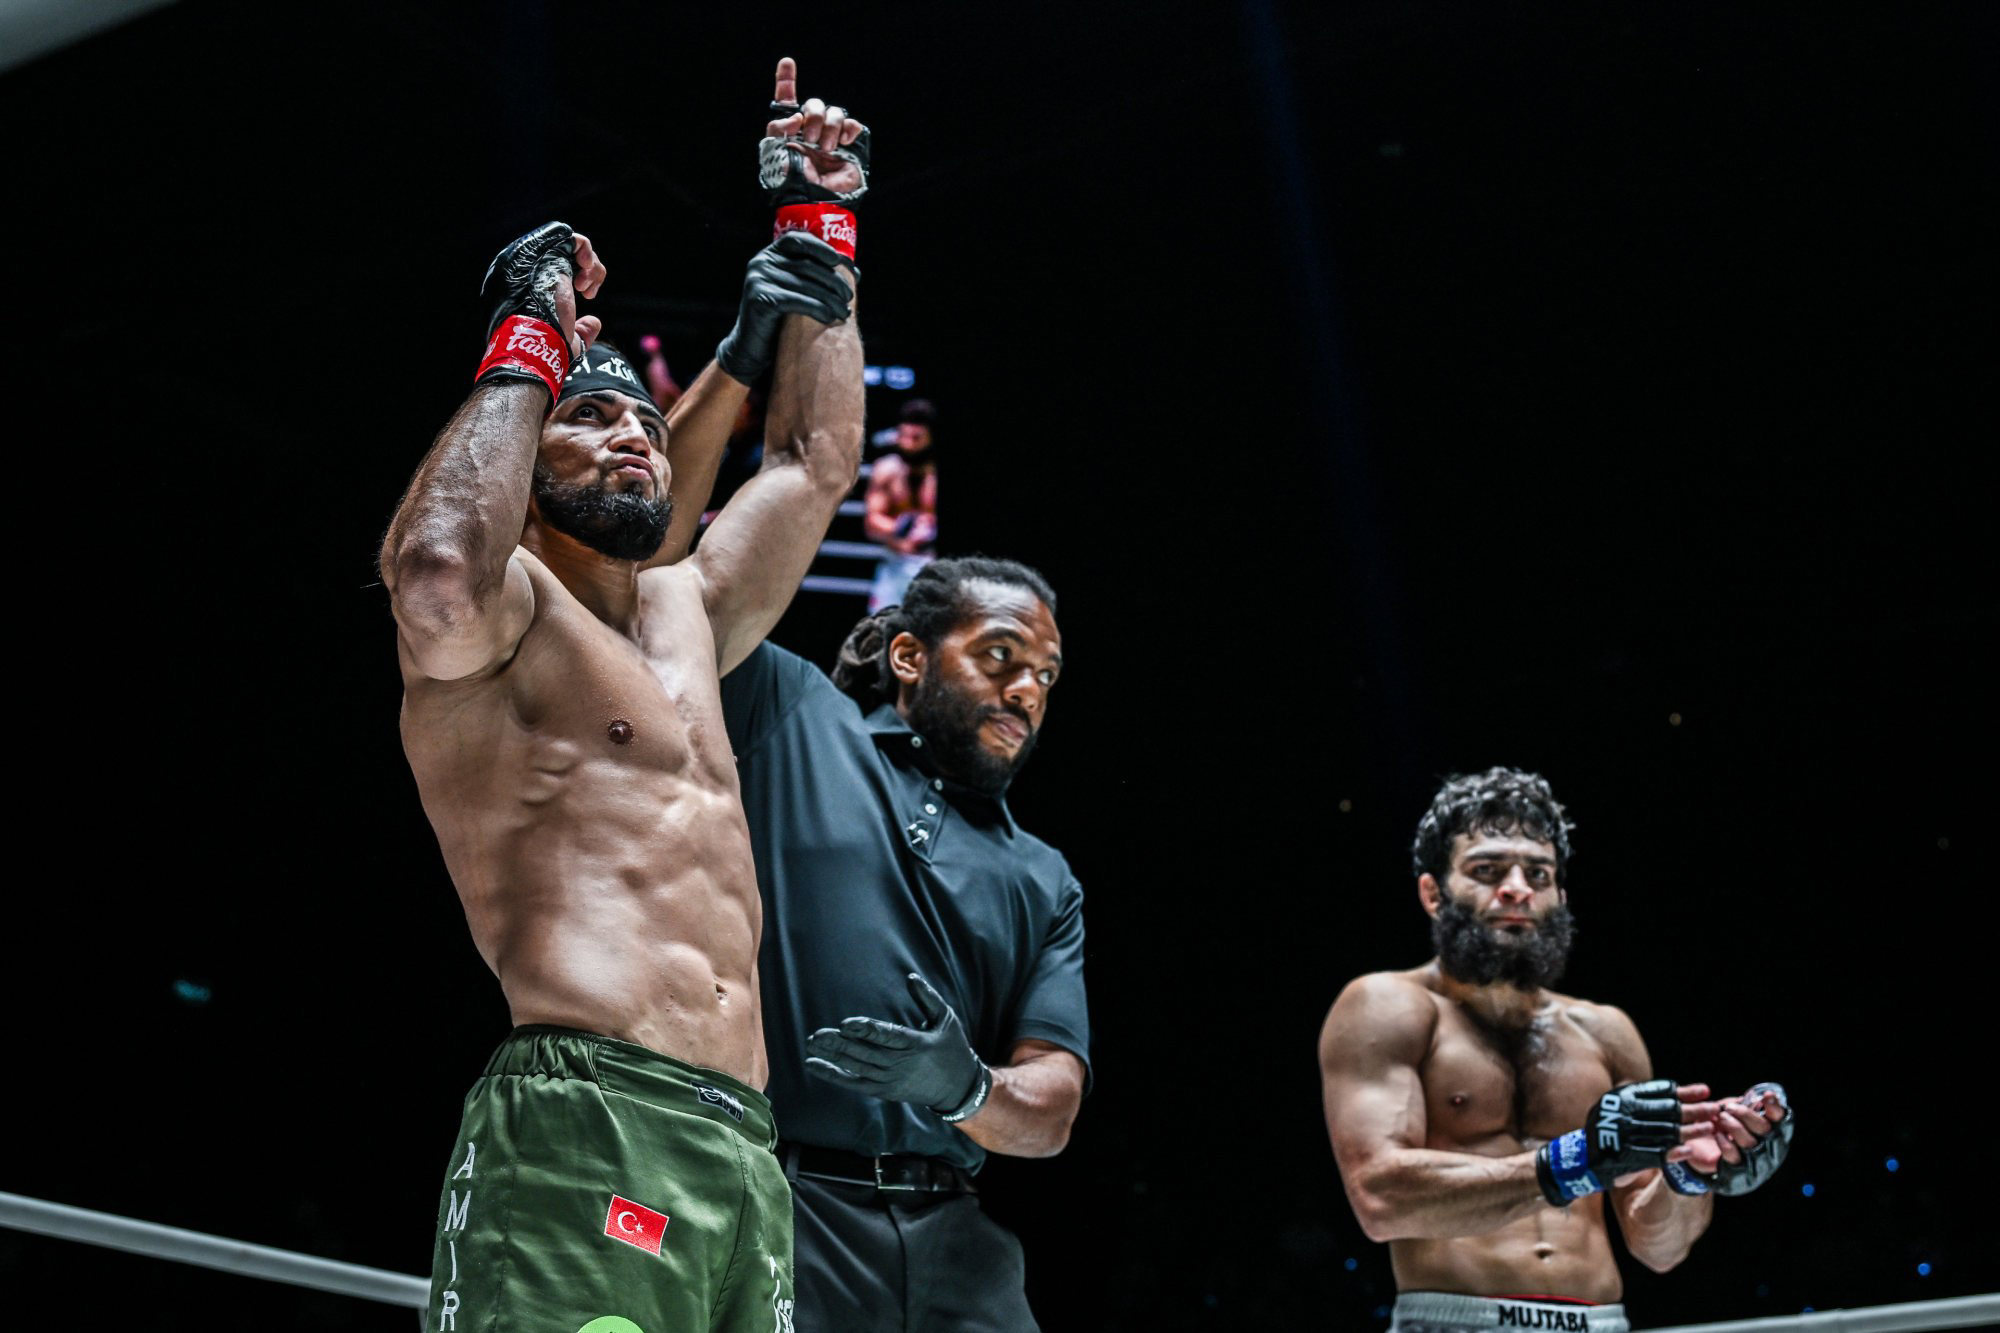 ONE Championship removes its lightweight MMA rankings, with Christian